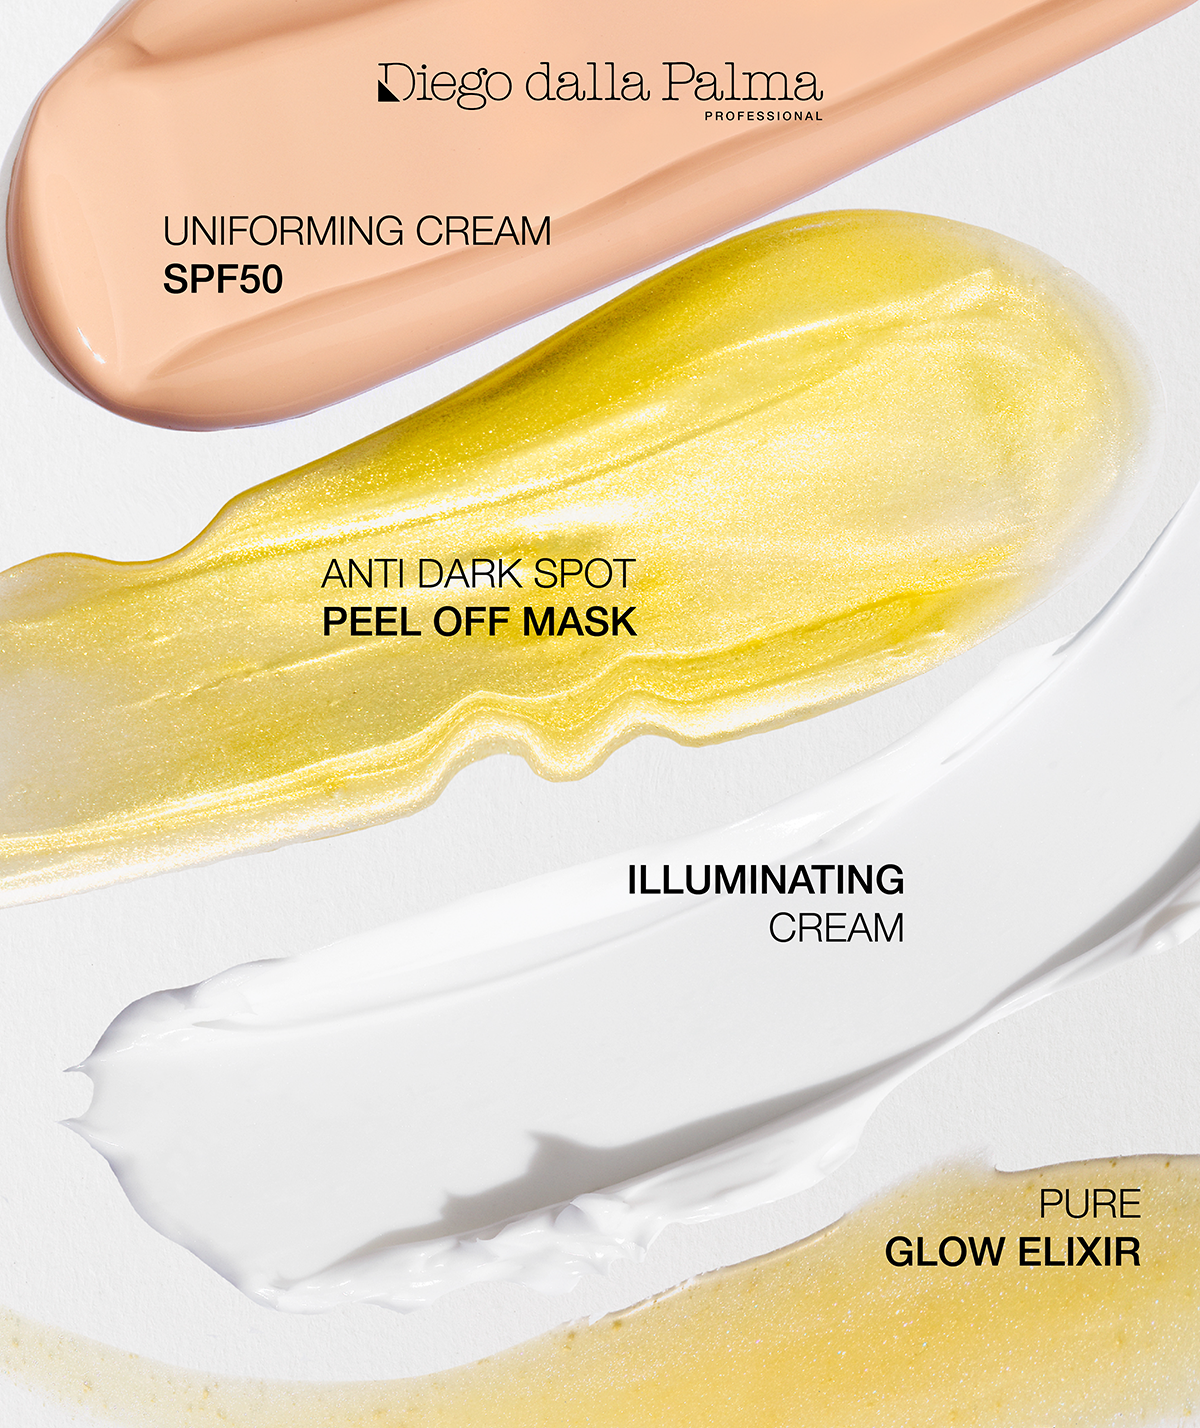 Diego dalla Palma Resurface2 Bright C is here to illuminate your complexion 10